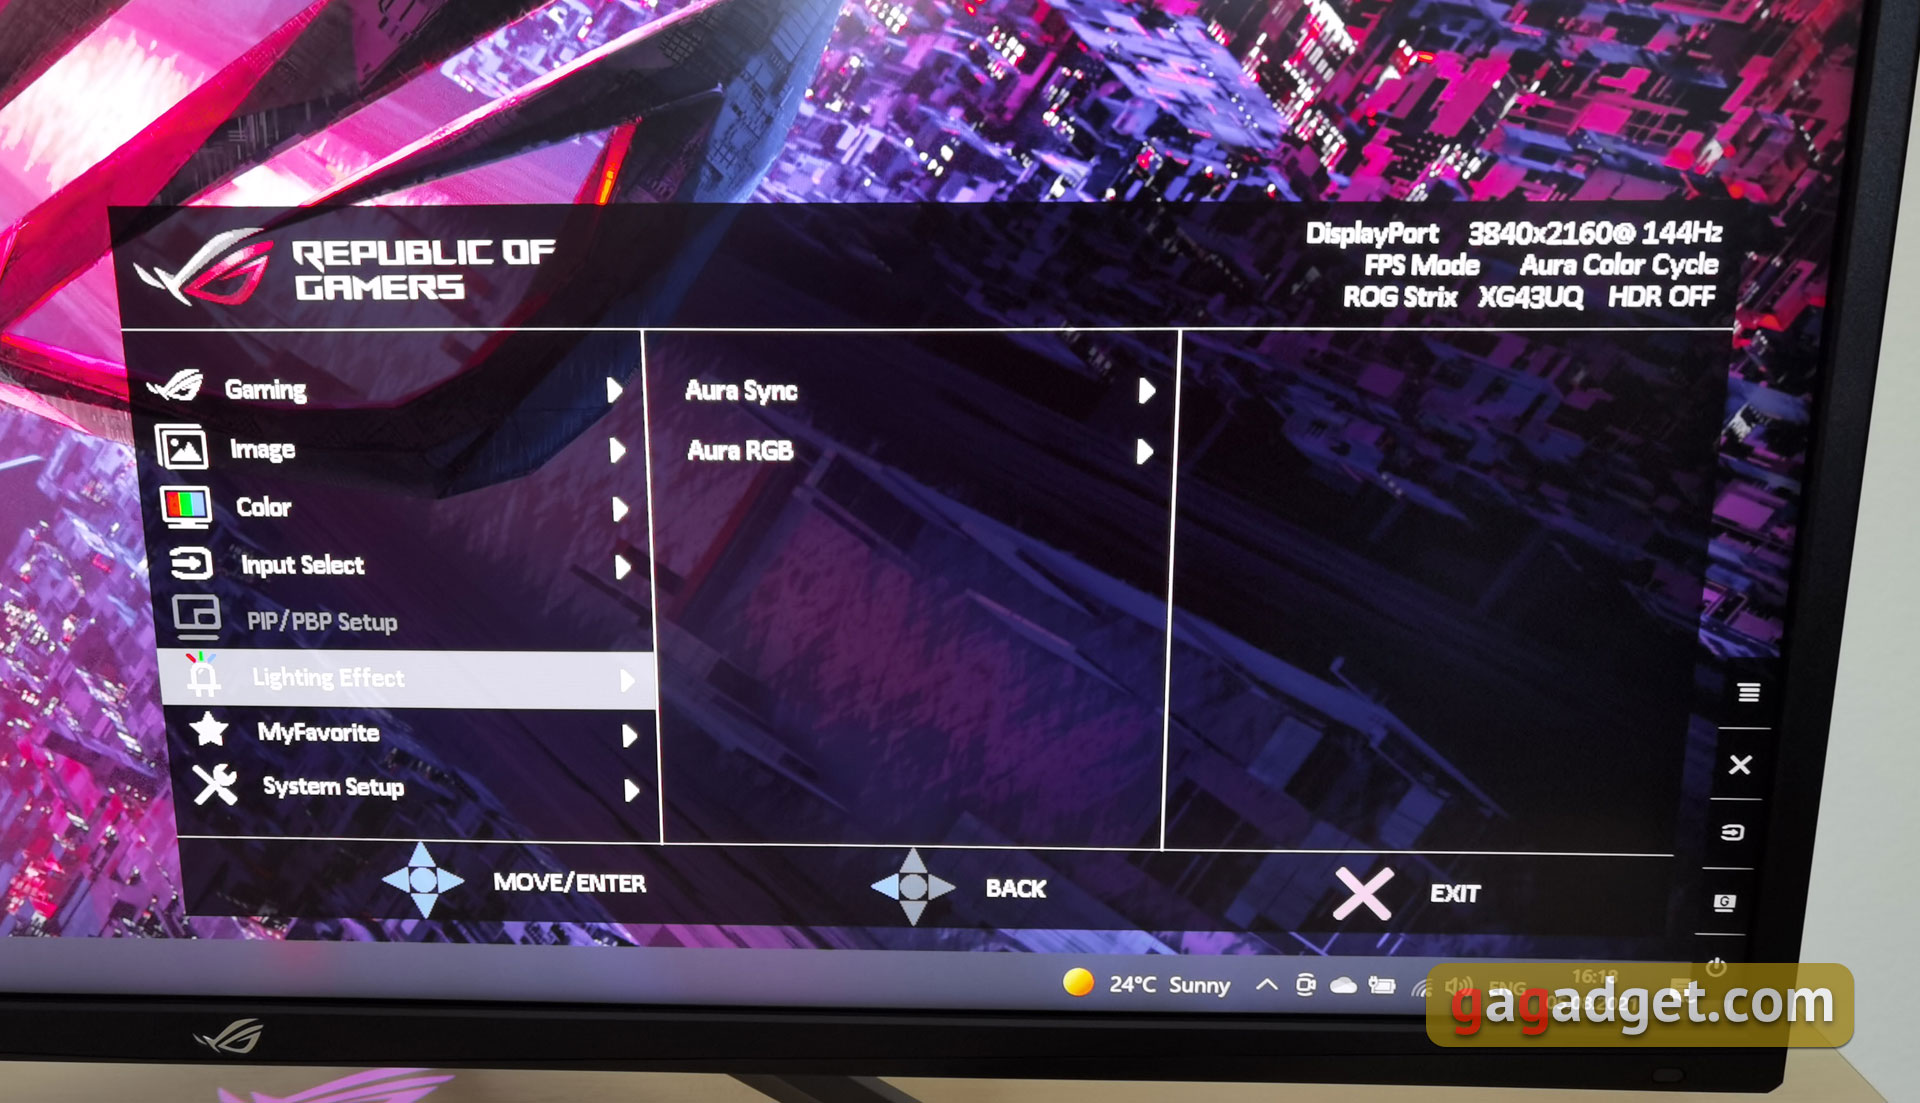 ASUS ROG Strix XG43UQ Overview: The Best Display for Next-Generation Gaming Consoles-40